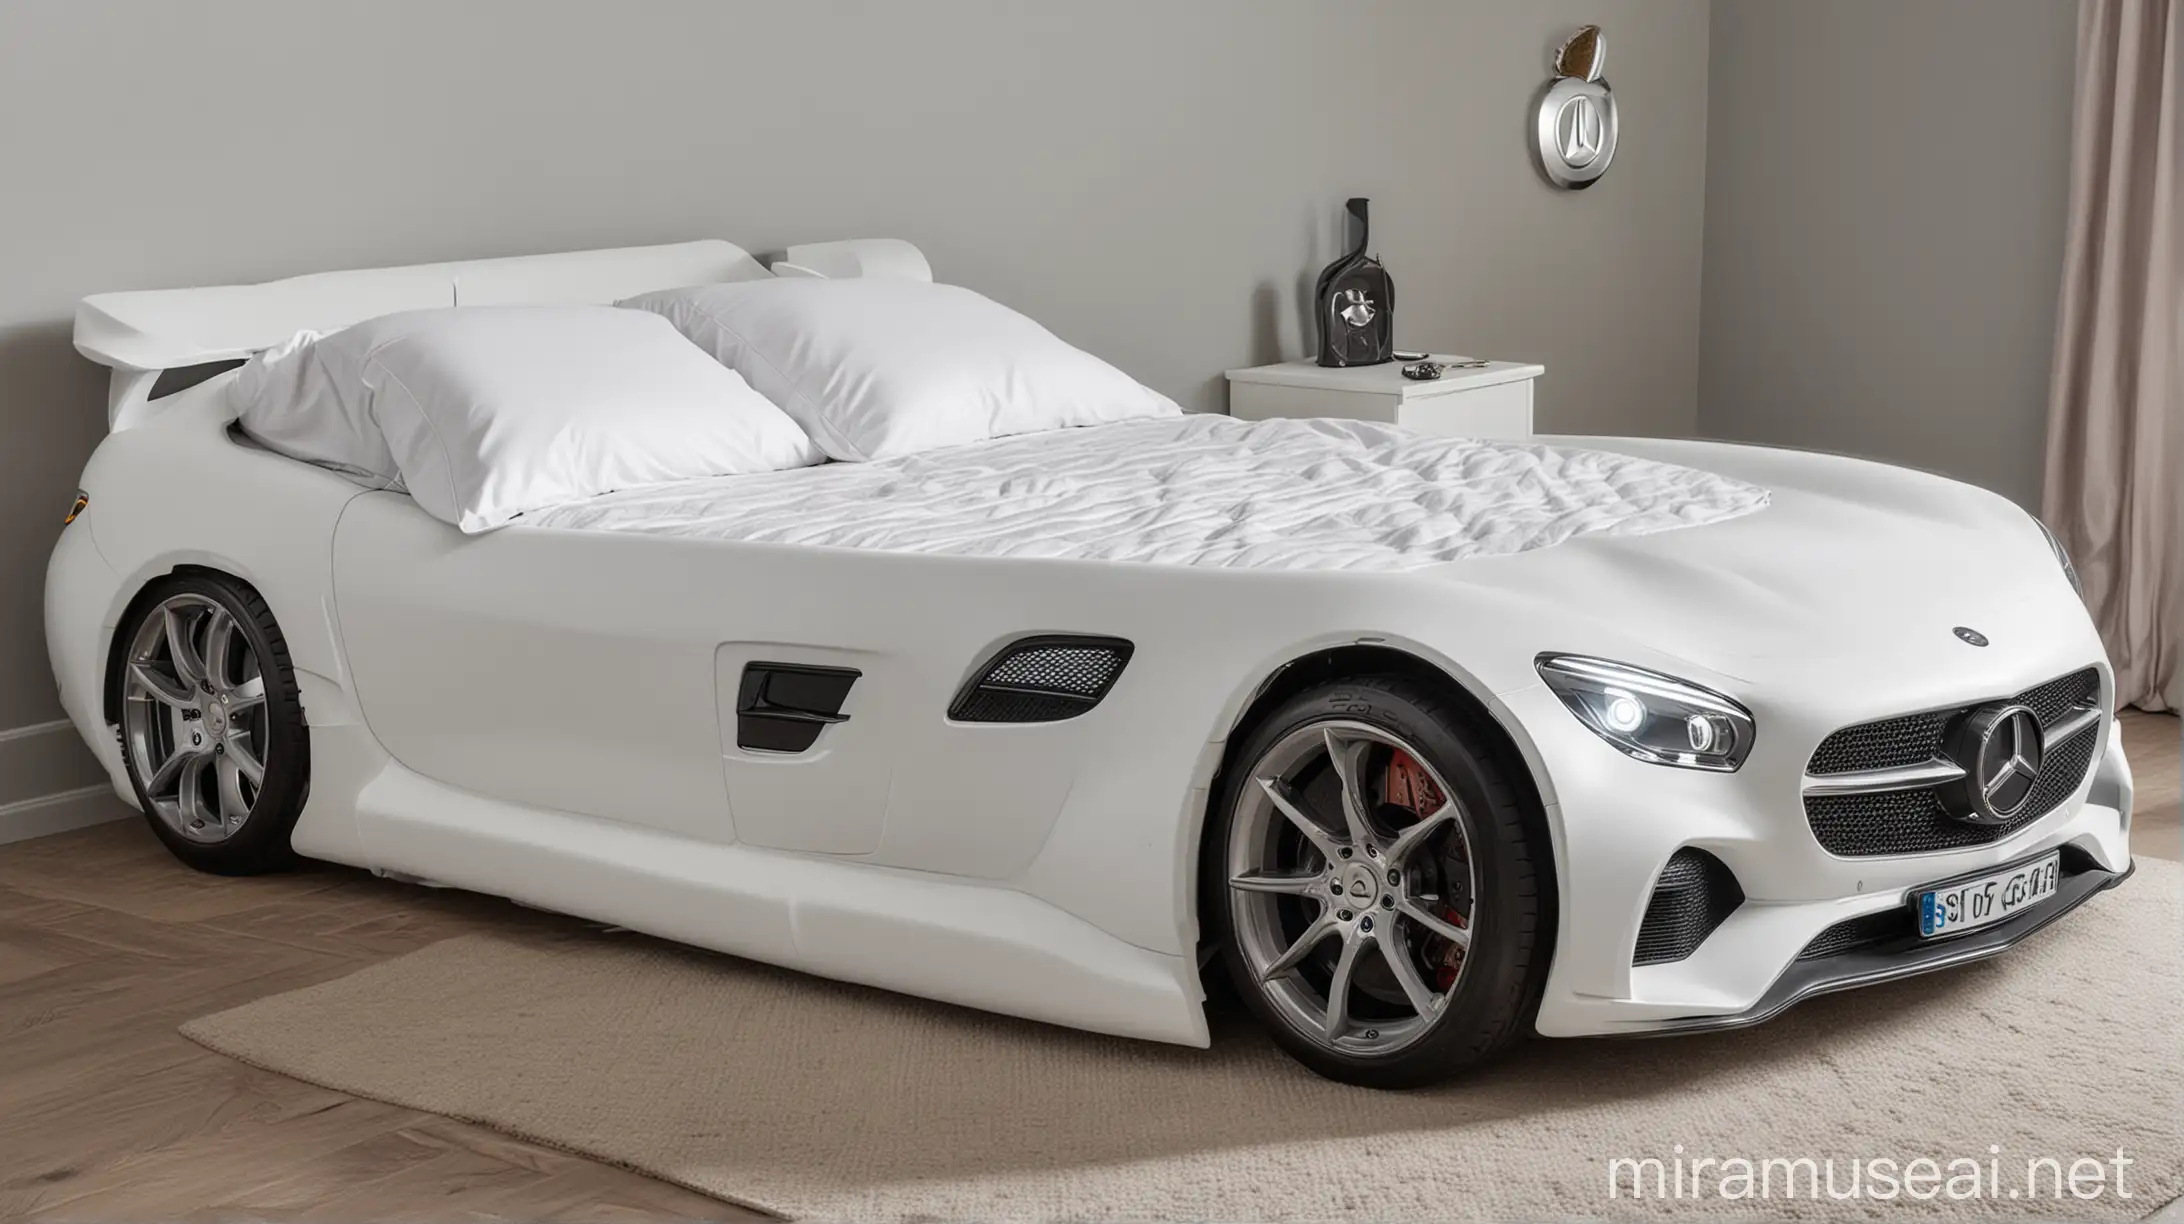 A double bed in the shape of a Mercedes gt car.